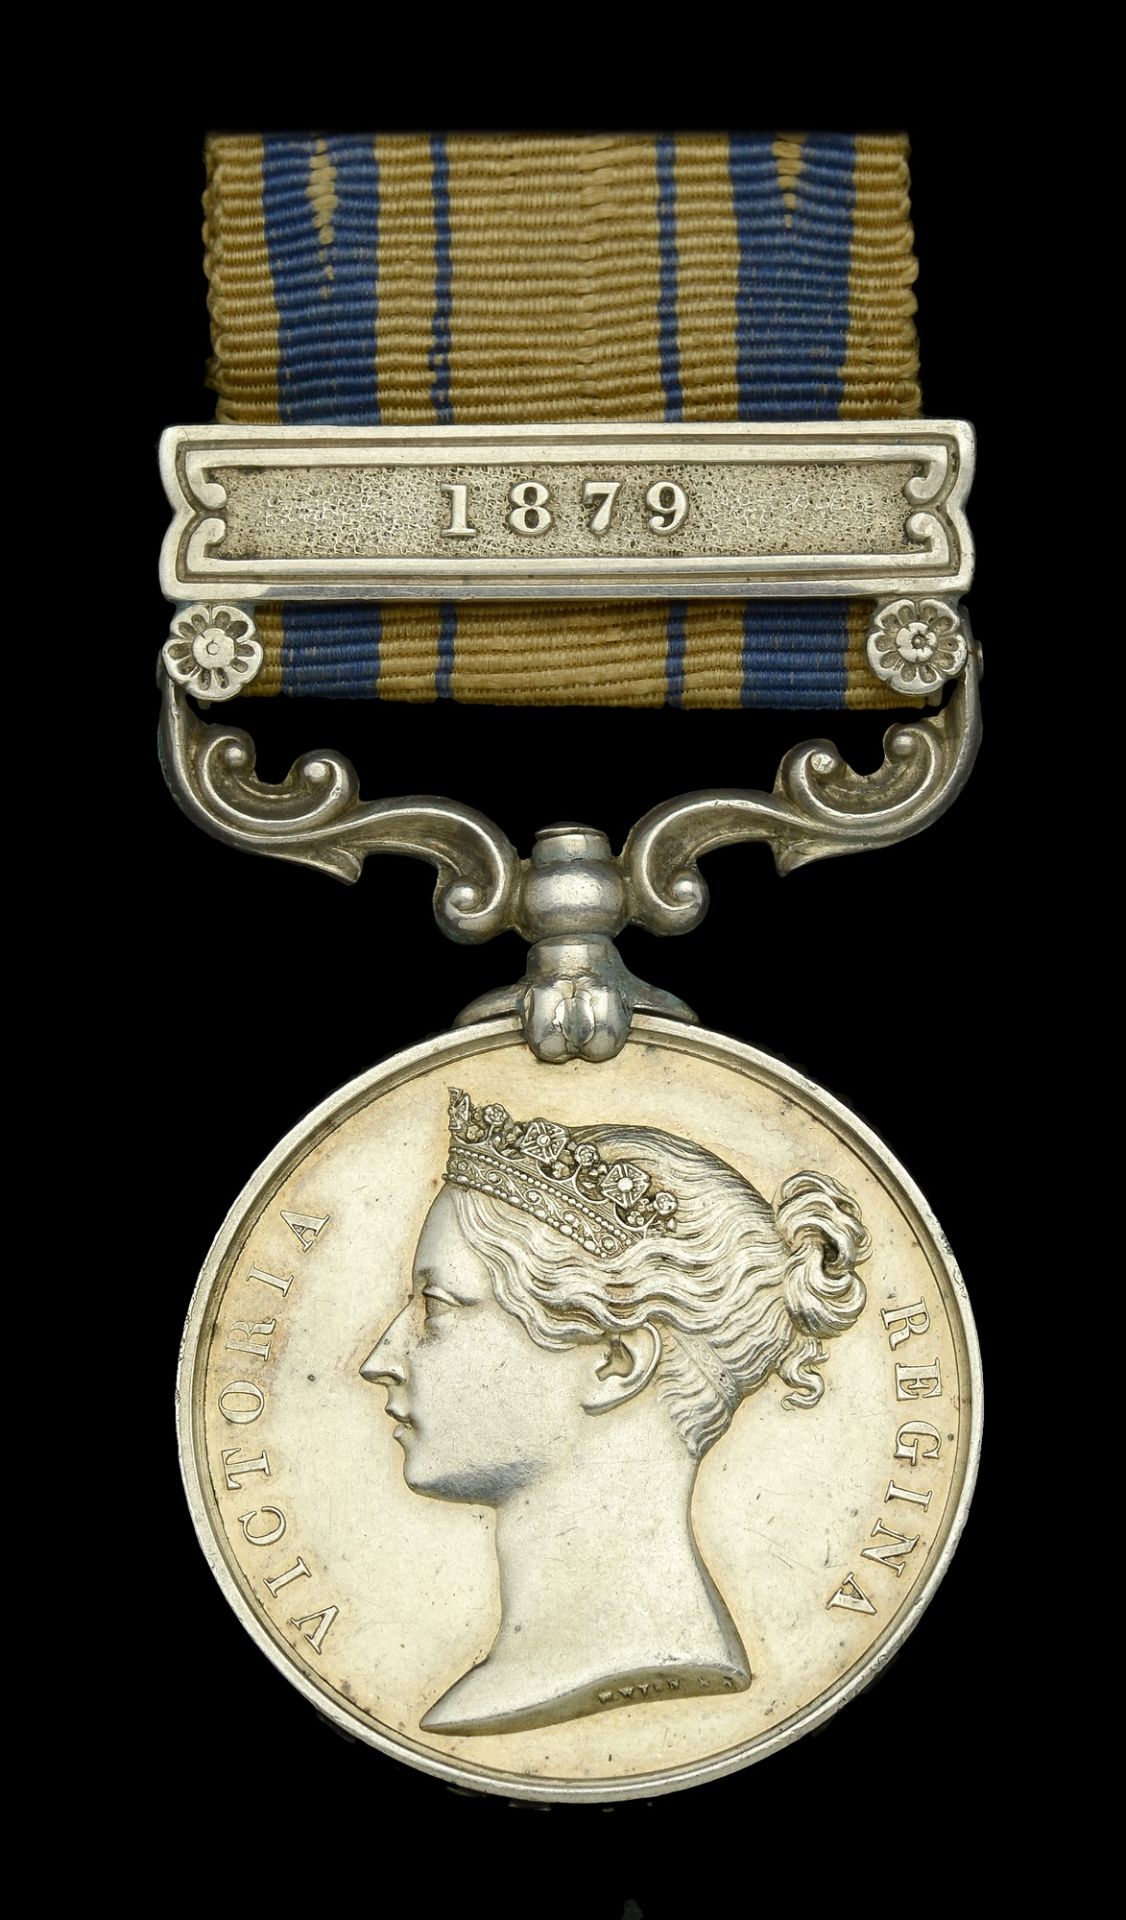 South Africa 1877-79, 1 clasp, 1879 (11/829 Pte. J. Teasdale. 2/4th Foot.) minor edge bruise...